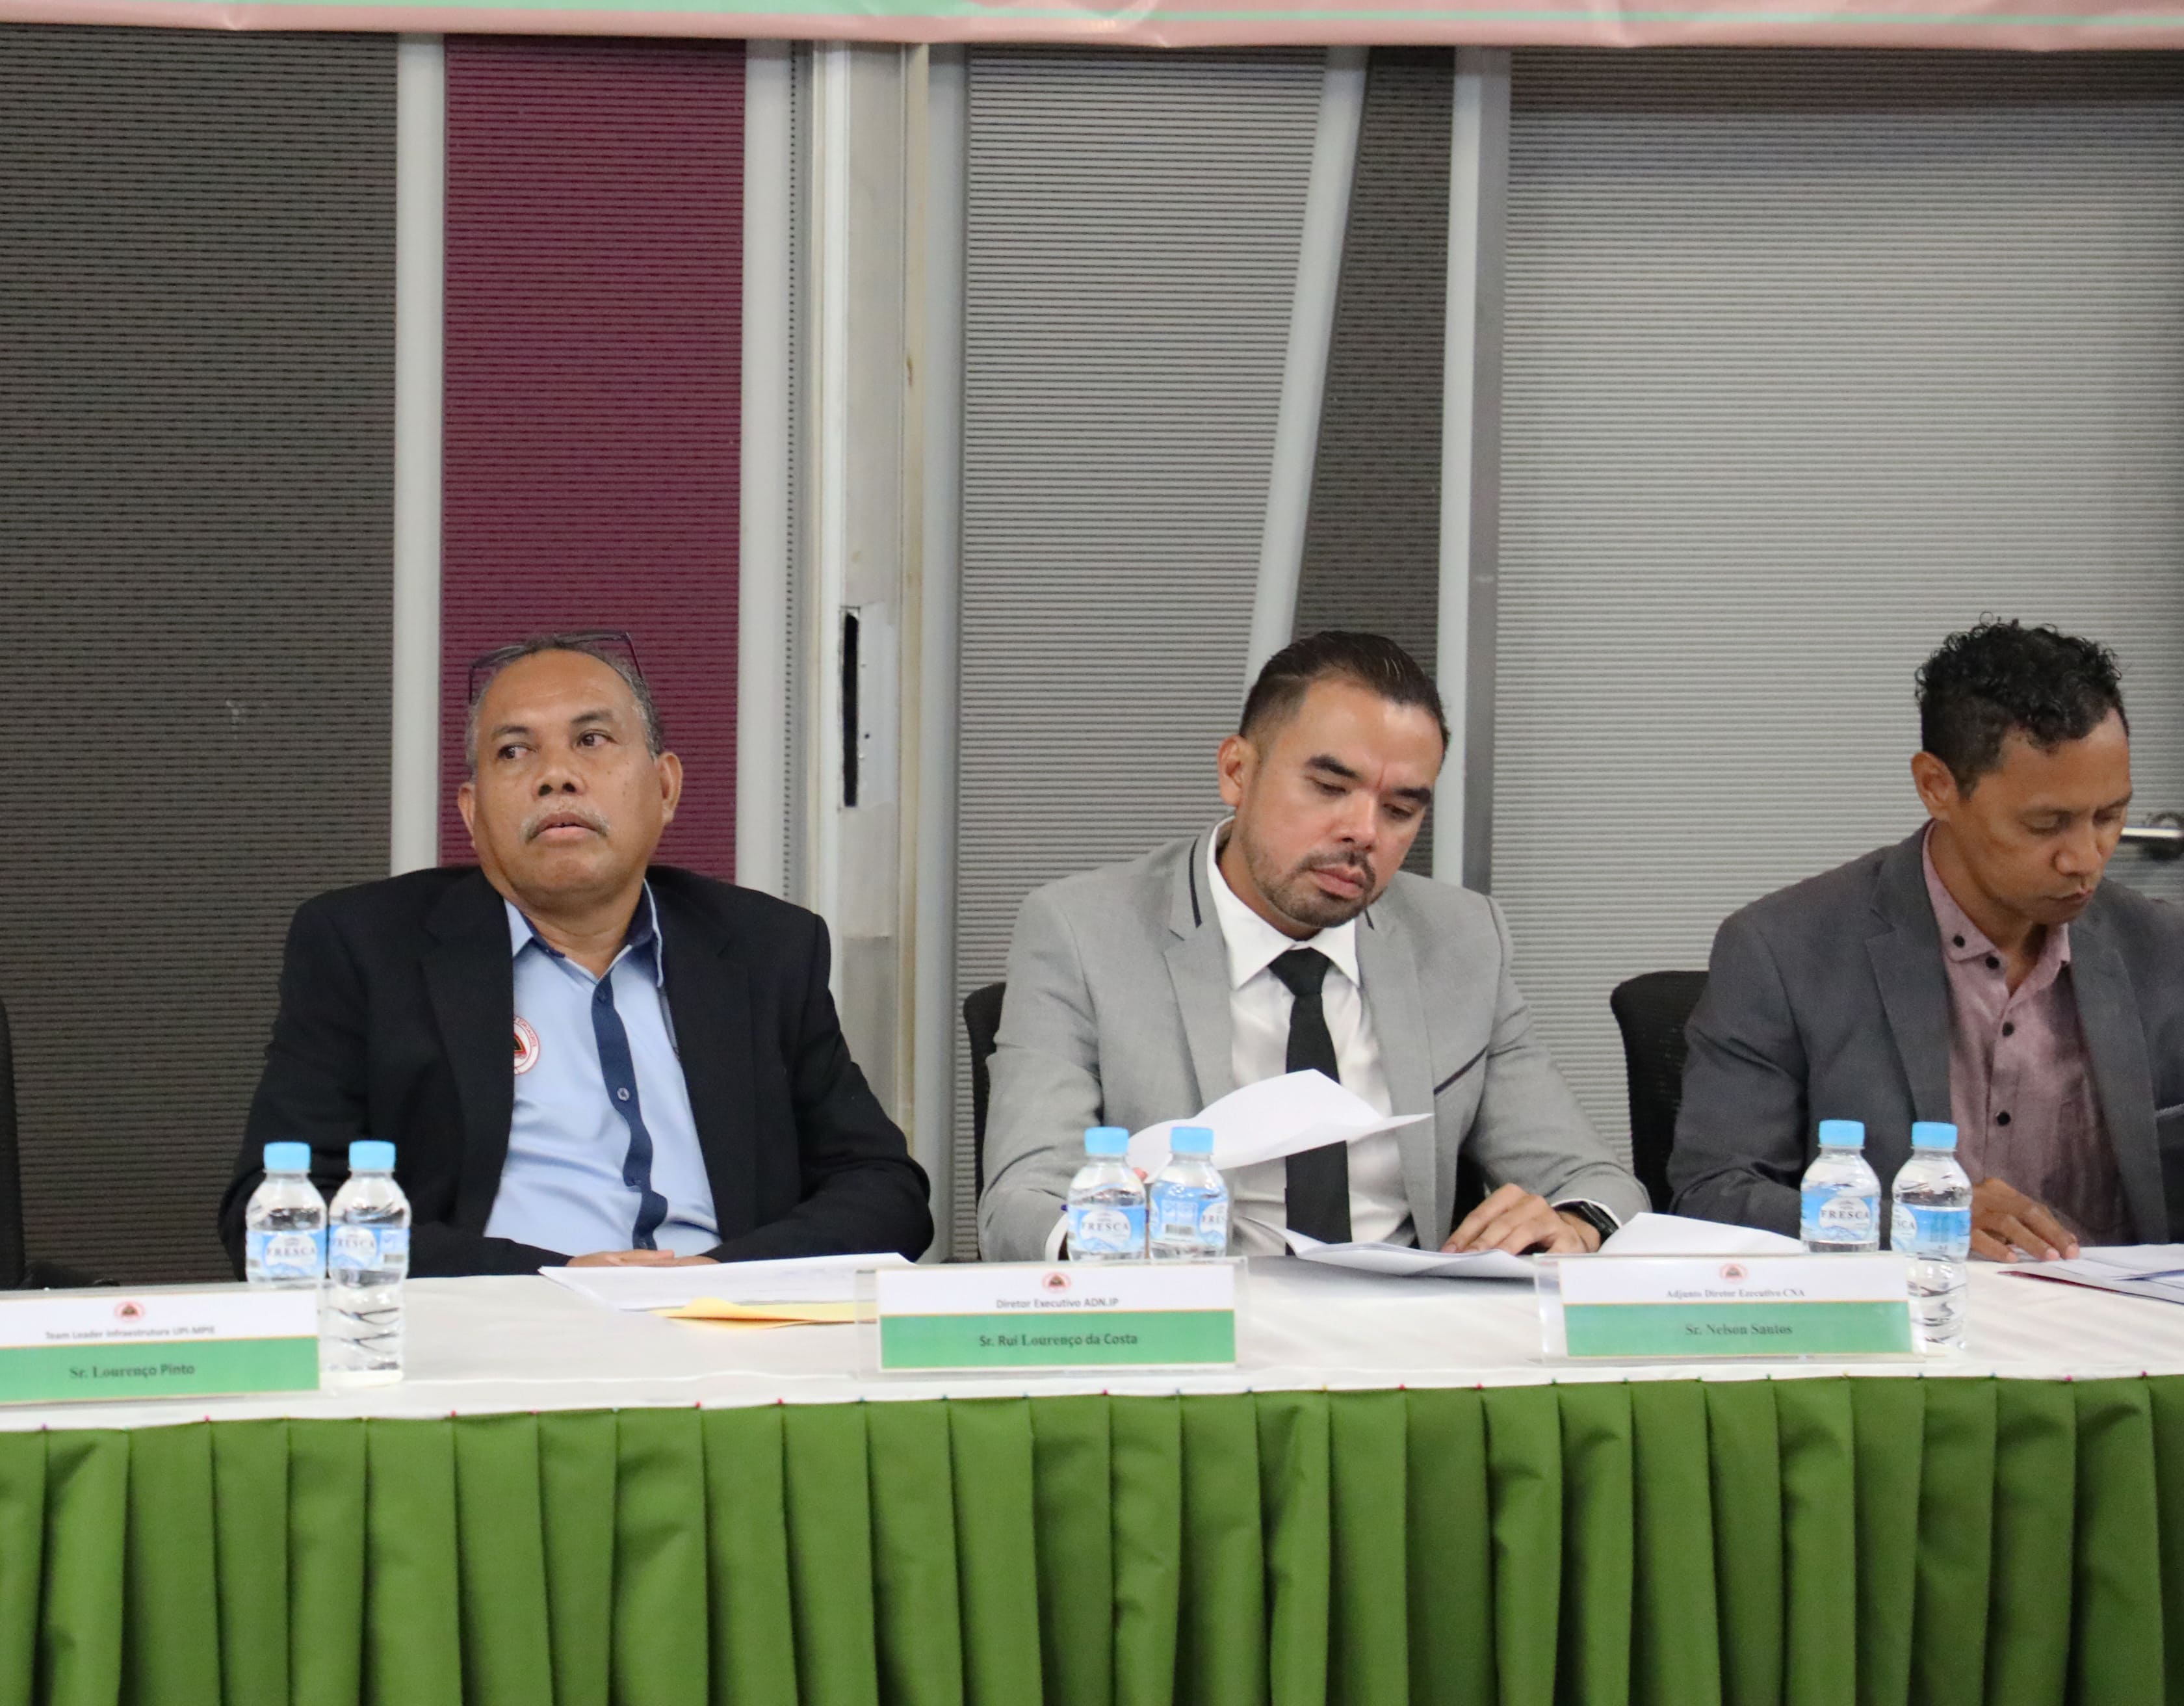 the Ministry of Planning and Strategic Investment held a Seminar on Rules and Procedures for Infrastructure Development in Timor-Leste